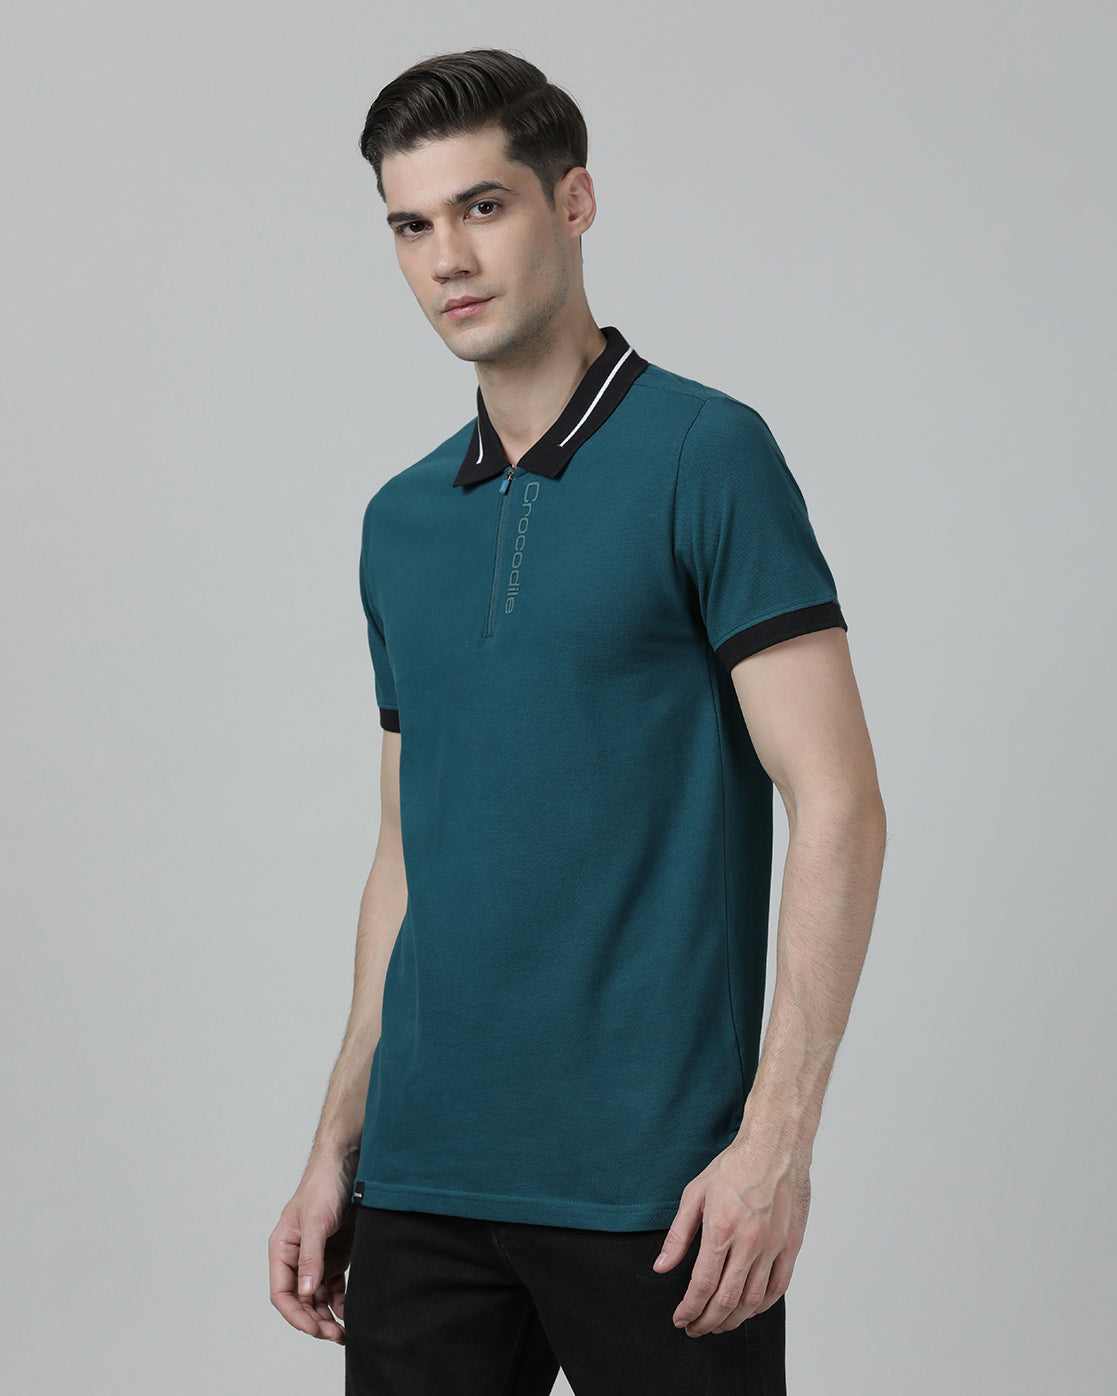 Casual Solid Printed Slim Fit Half Sleeve Teal Polo T-shirt with Collar